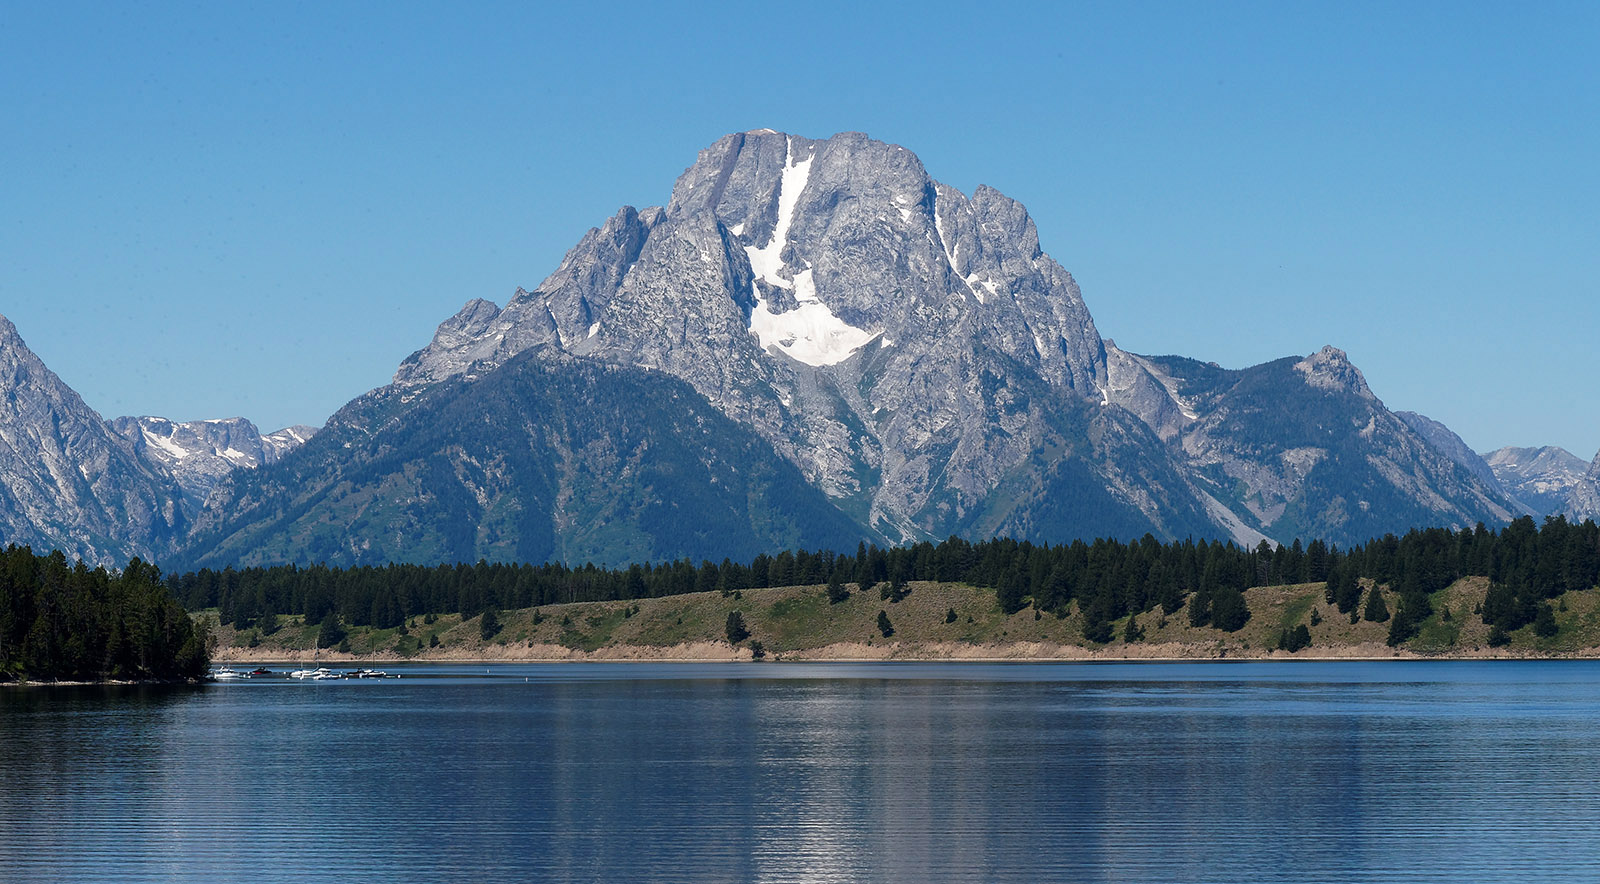 Mt. Moran with Jackson Lake in the foreground.